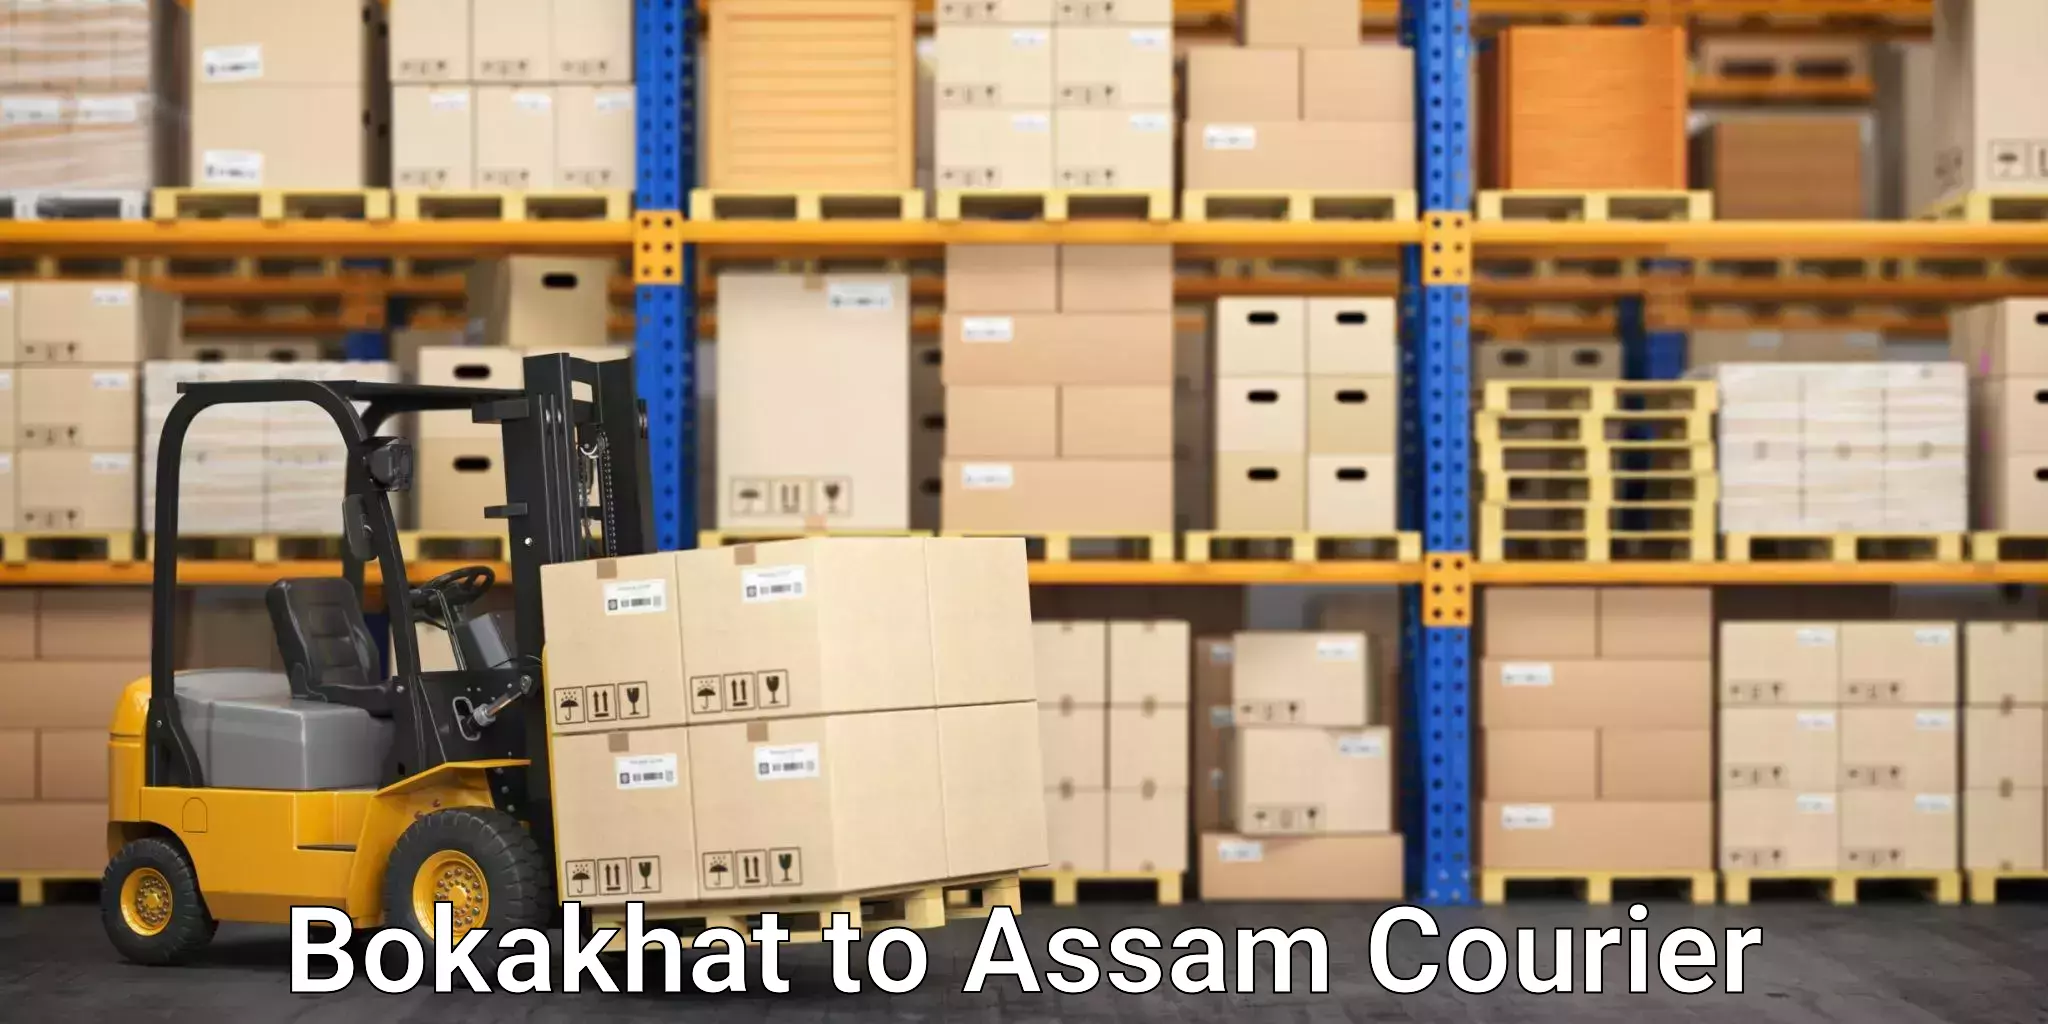 24/7 courier service Bokakhat to Assam